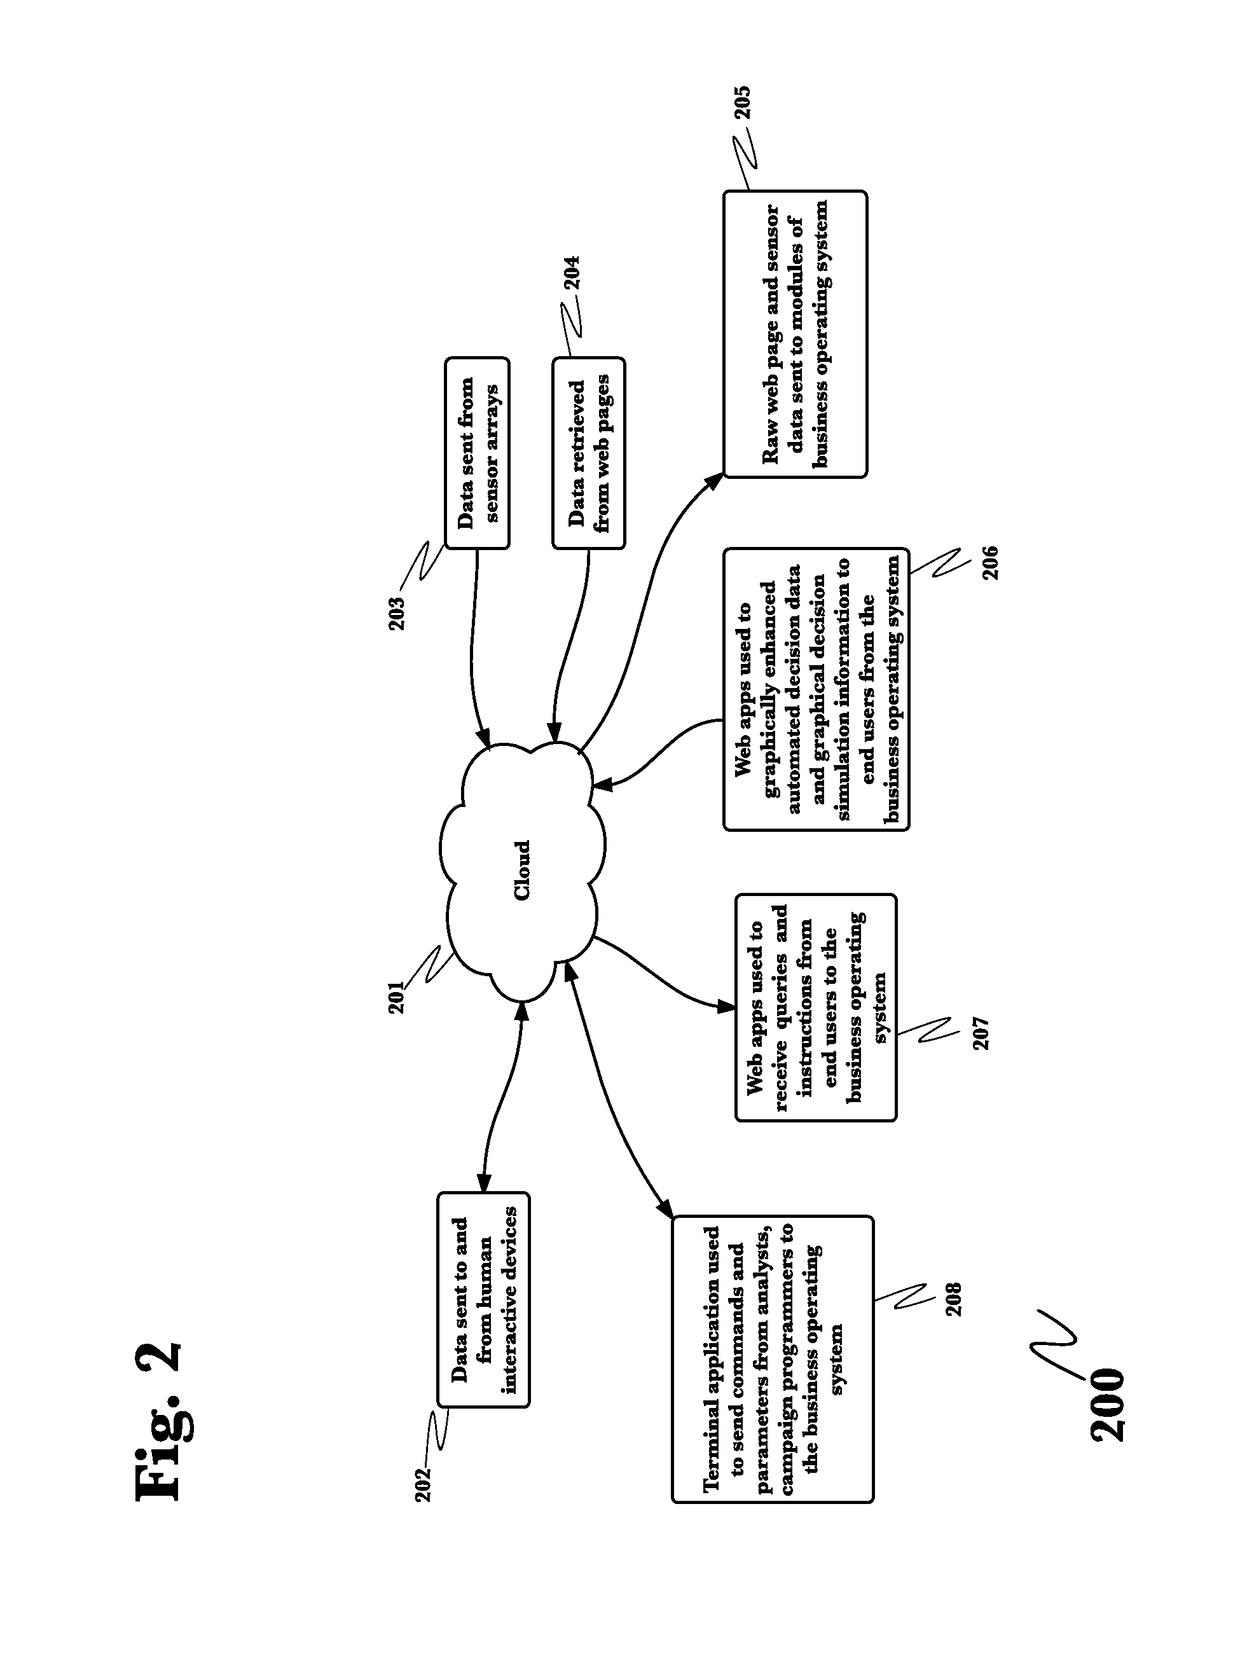 System for fully integrated capture, and analysis of business information resulting in predictive decision making and simulation